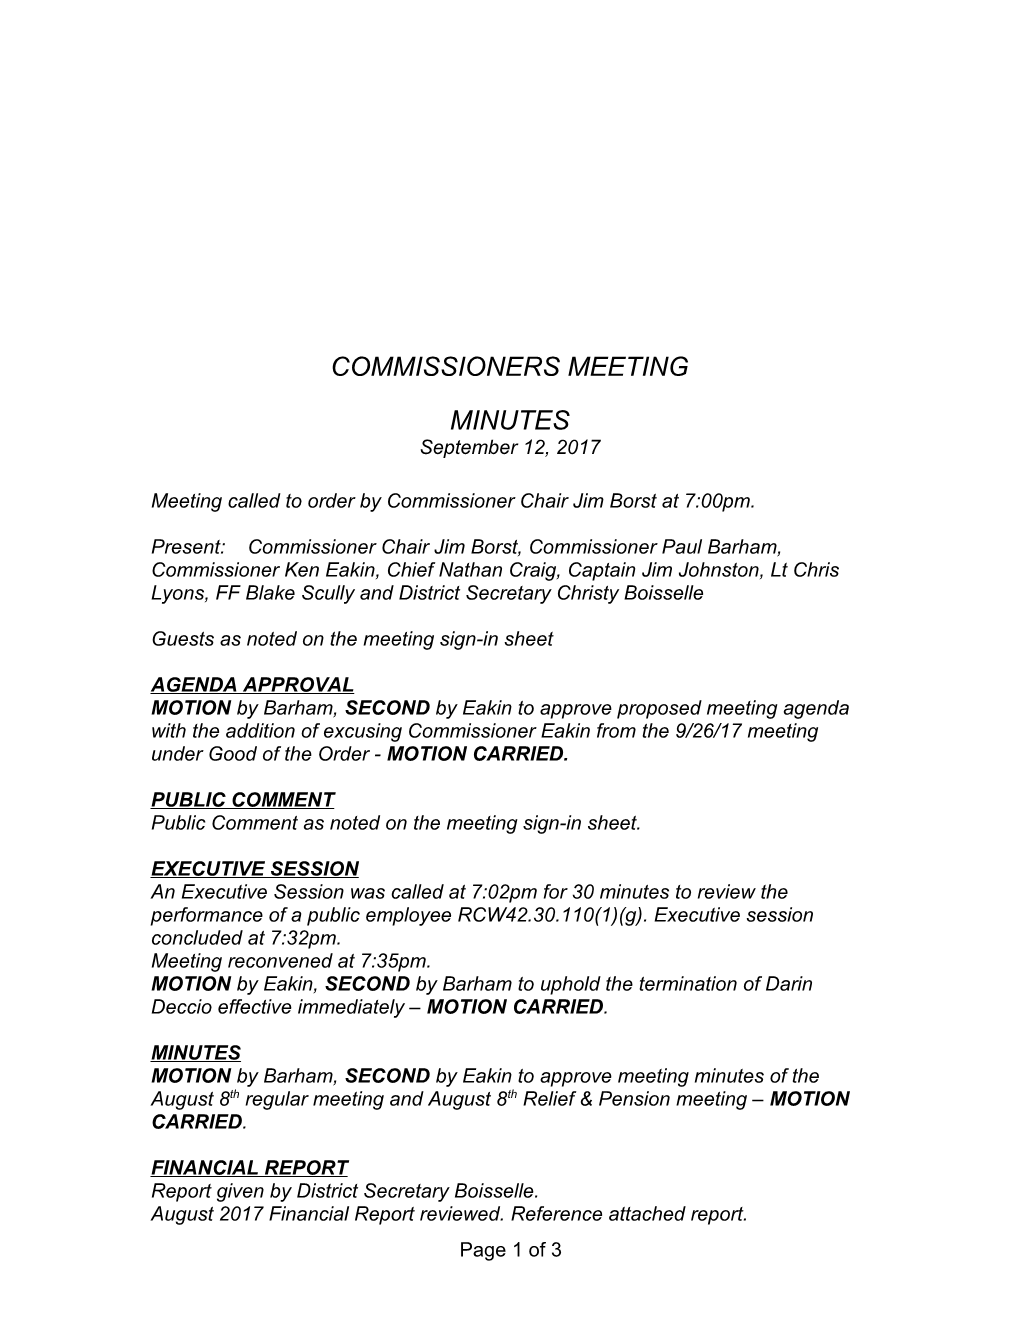 Meeting Called to Order by Commissioner Chair Jim Borstat 7:00Pm